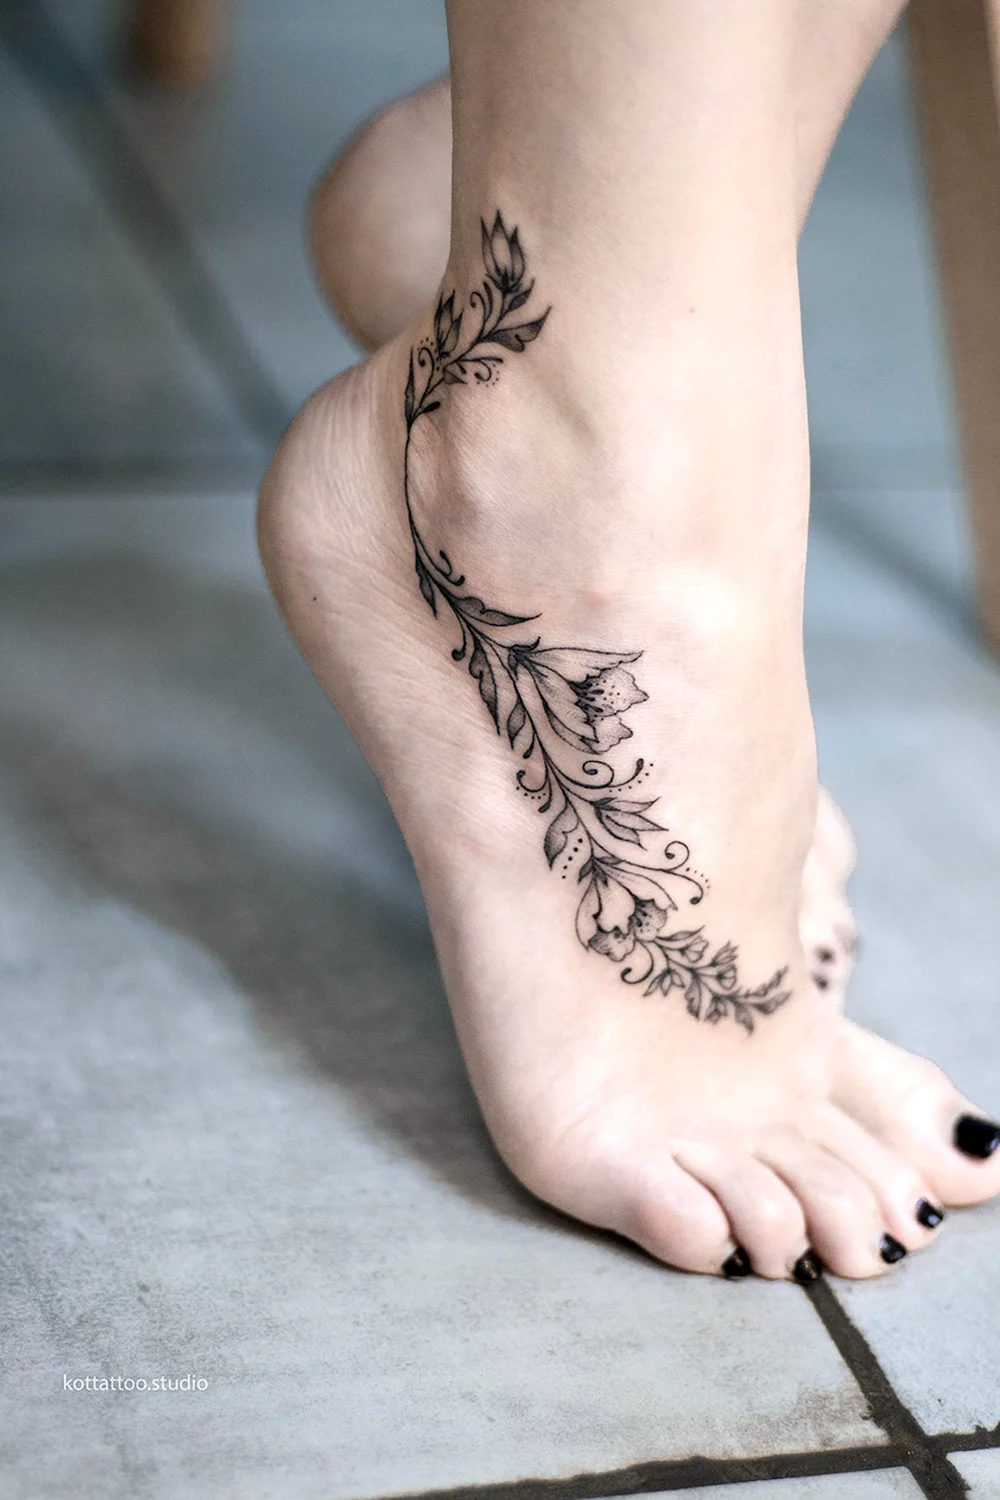 Tattoos around the Ankle